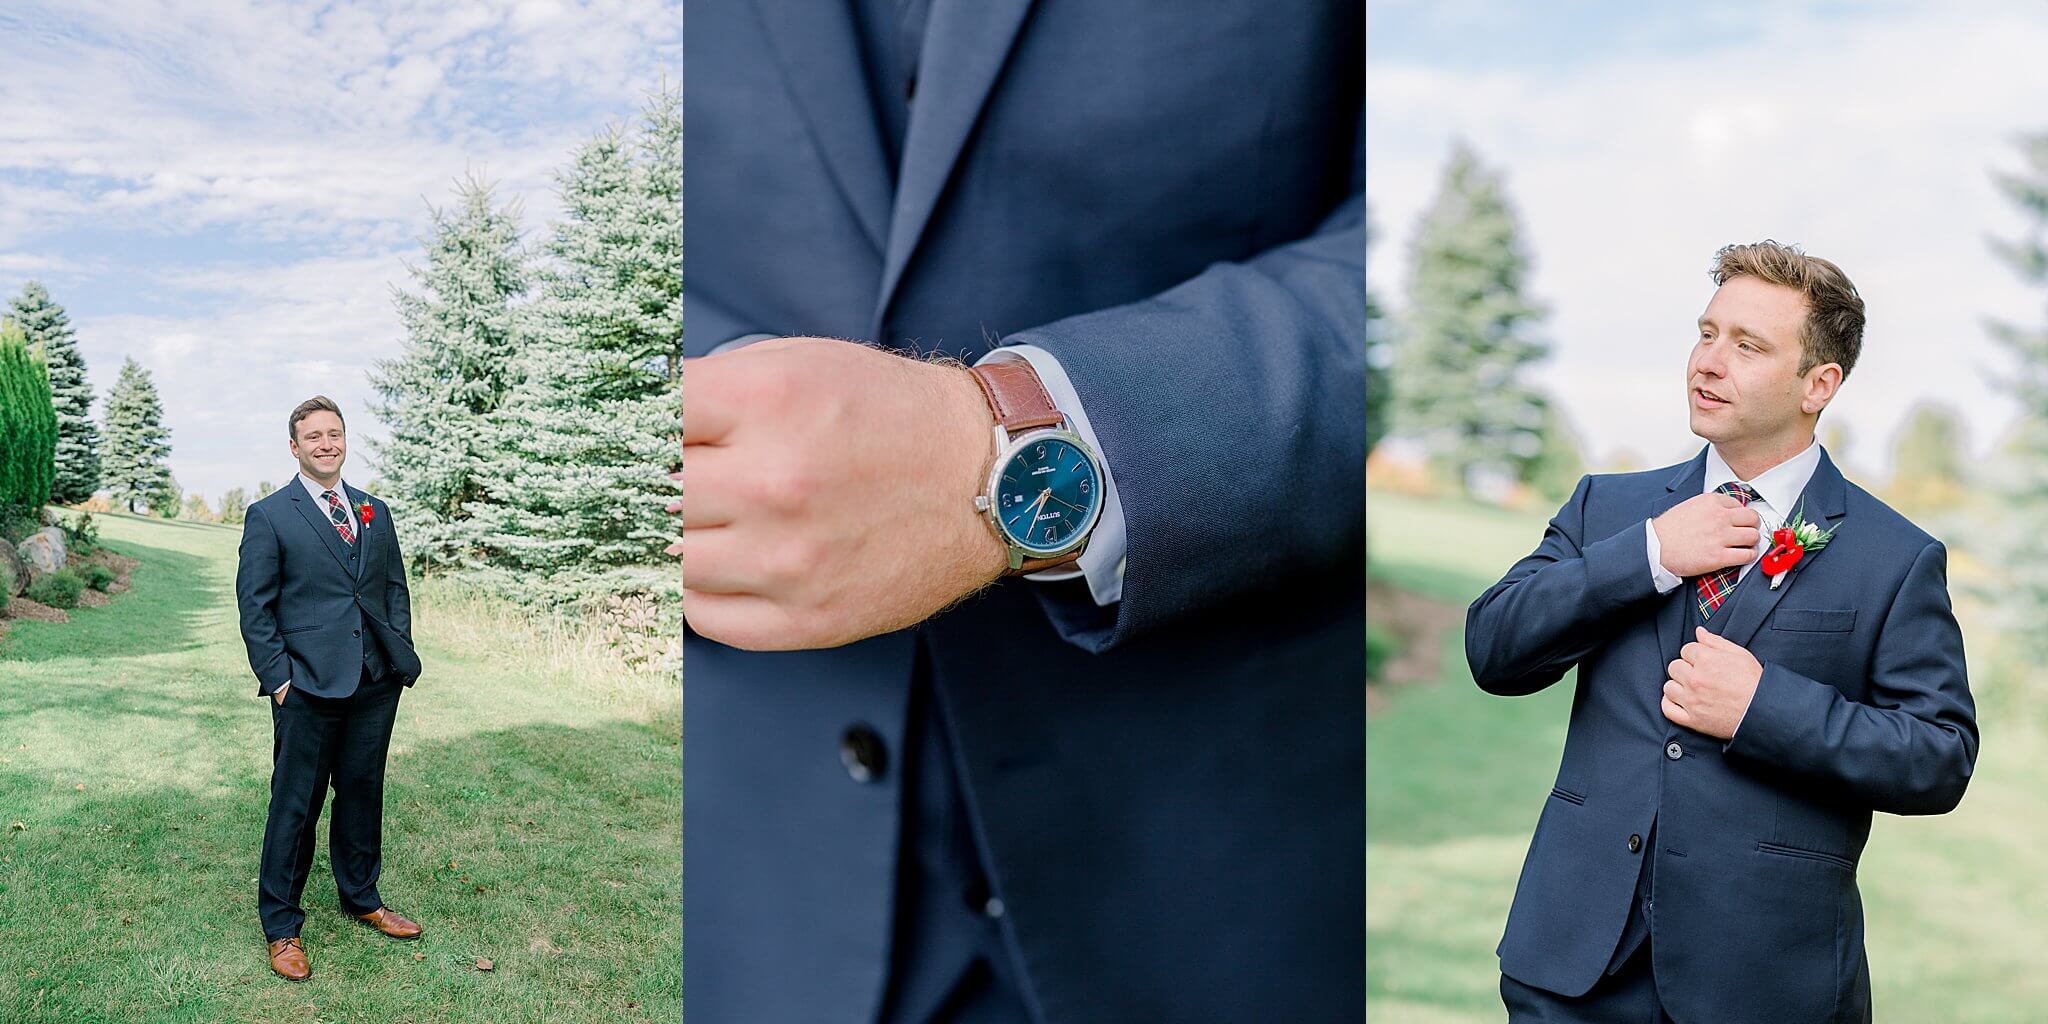 Groom portraits during Timberlee Hills Wedding in Traverse City, Northern Michigan.